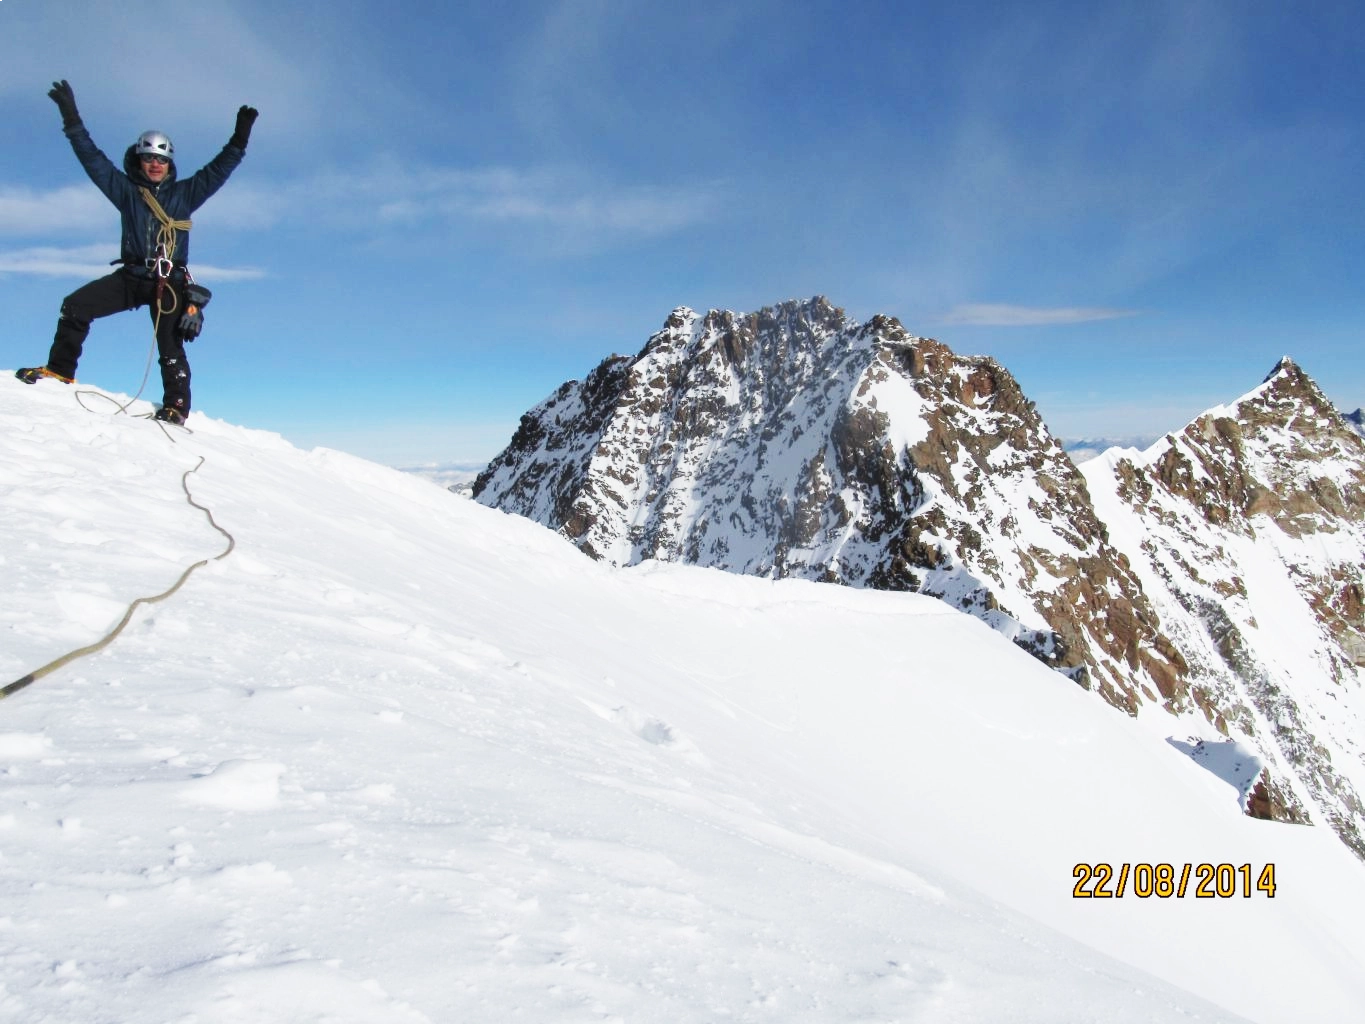 Alpine Skills – How to rope up on the glacier?